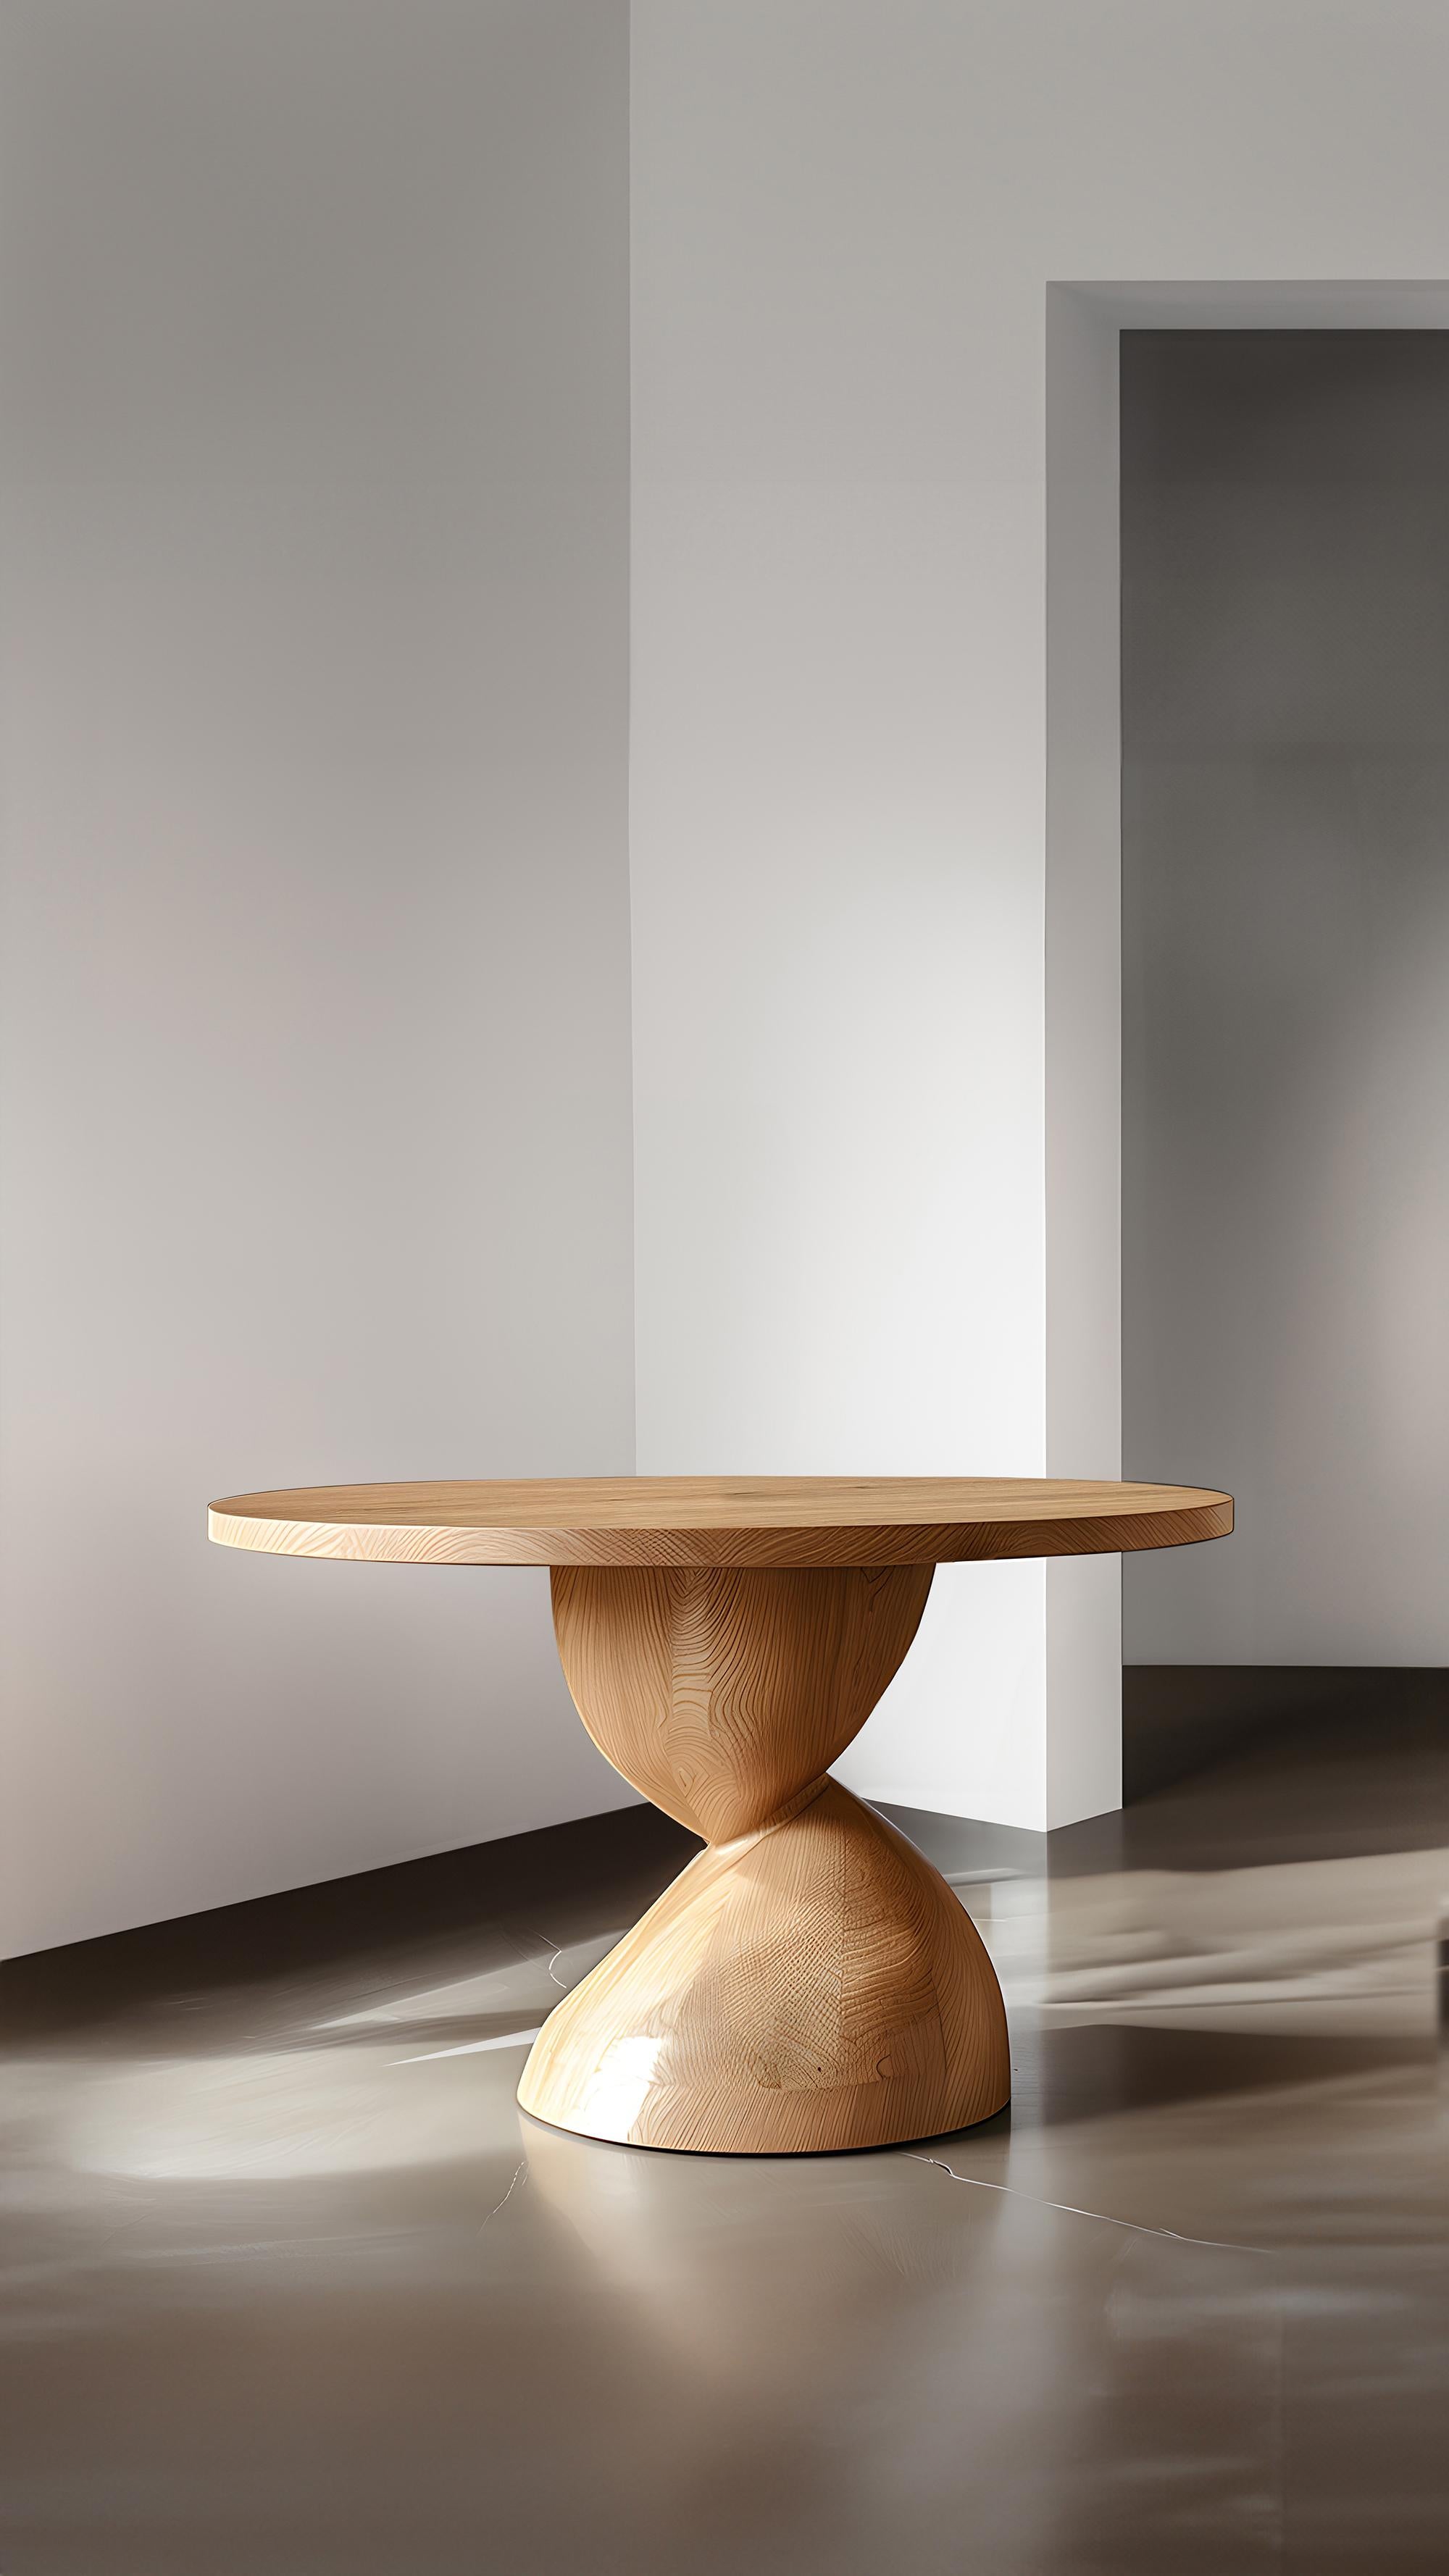 Hand-Crafted Dining Tables, Socle's Solid Wood No18, Mealtime Masterpieces by NONO For Sale